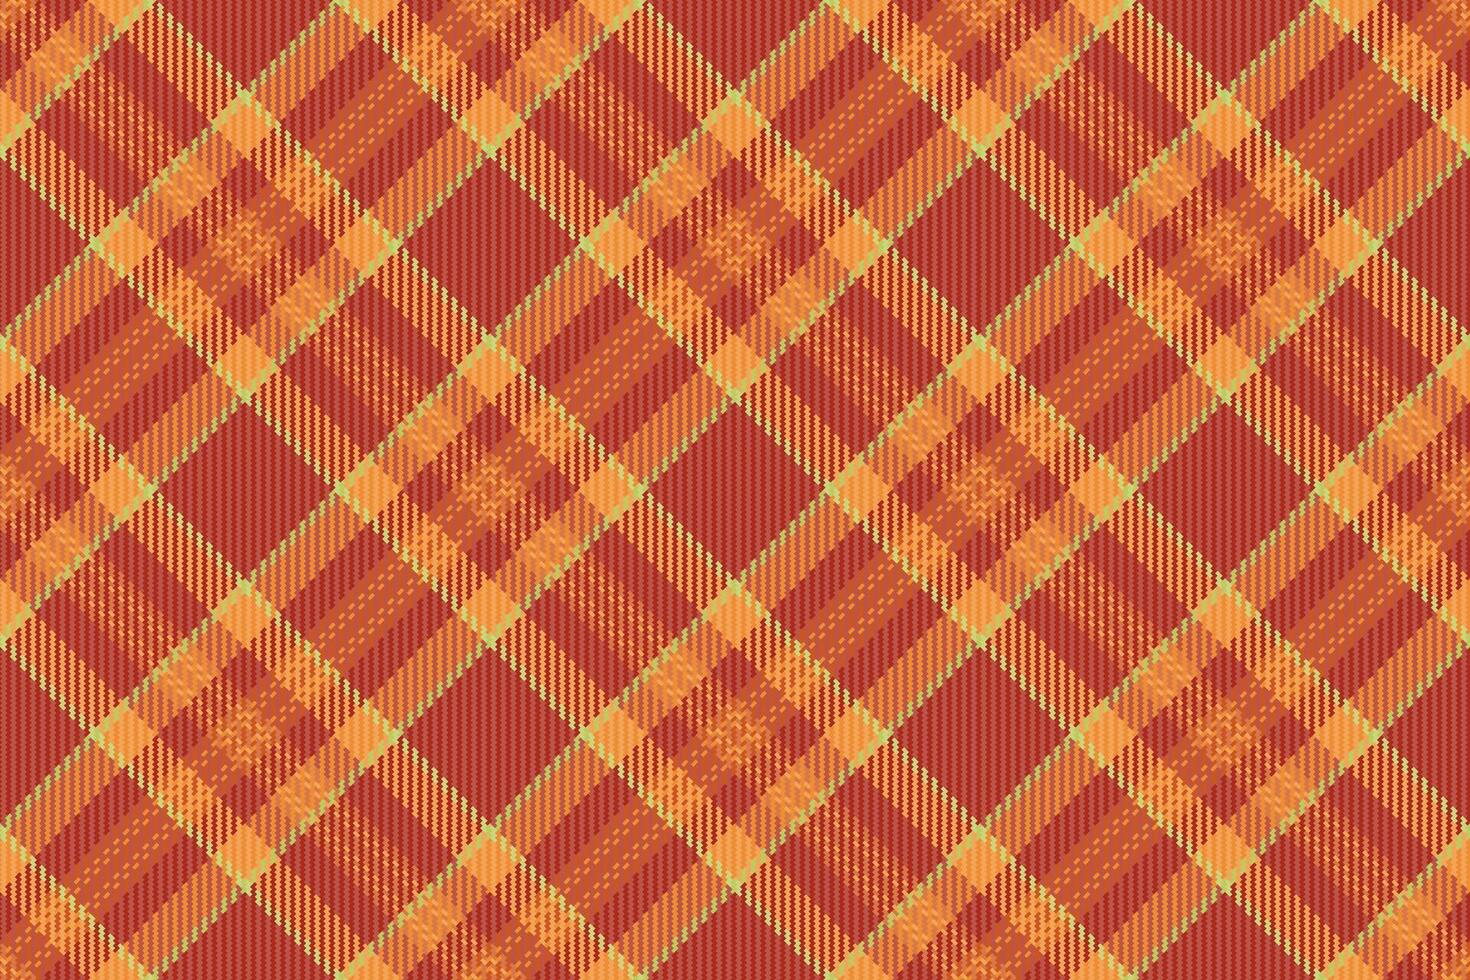 Nobility vector textile pattern, micro tartan seamless check. Industrial plaid background texture fabric in red and orange colors.